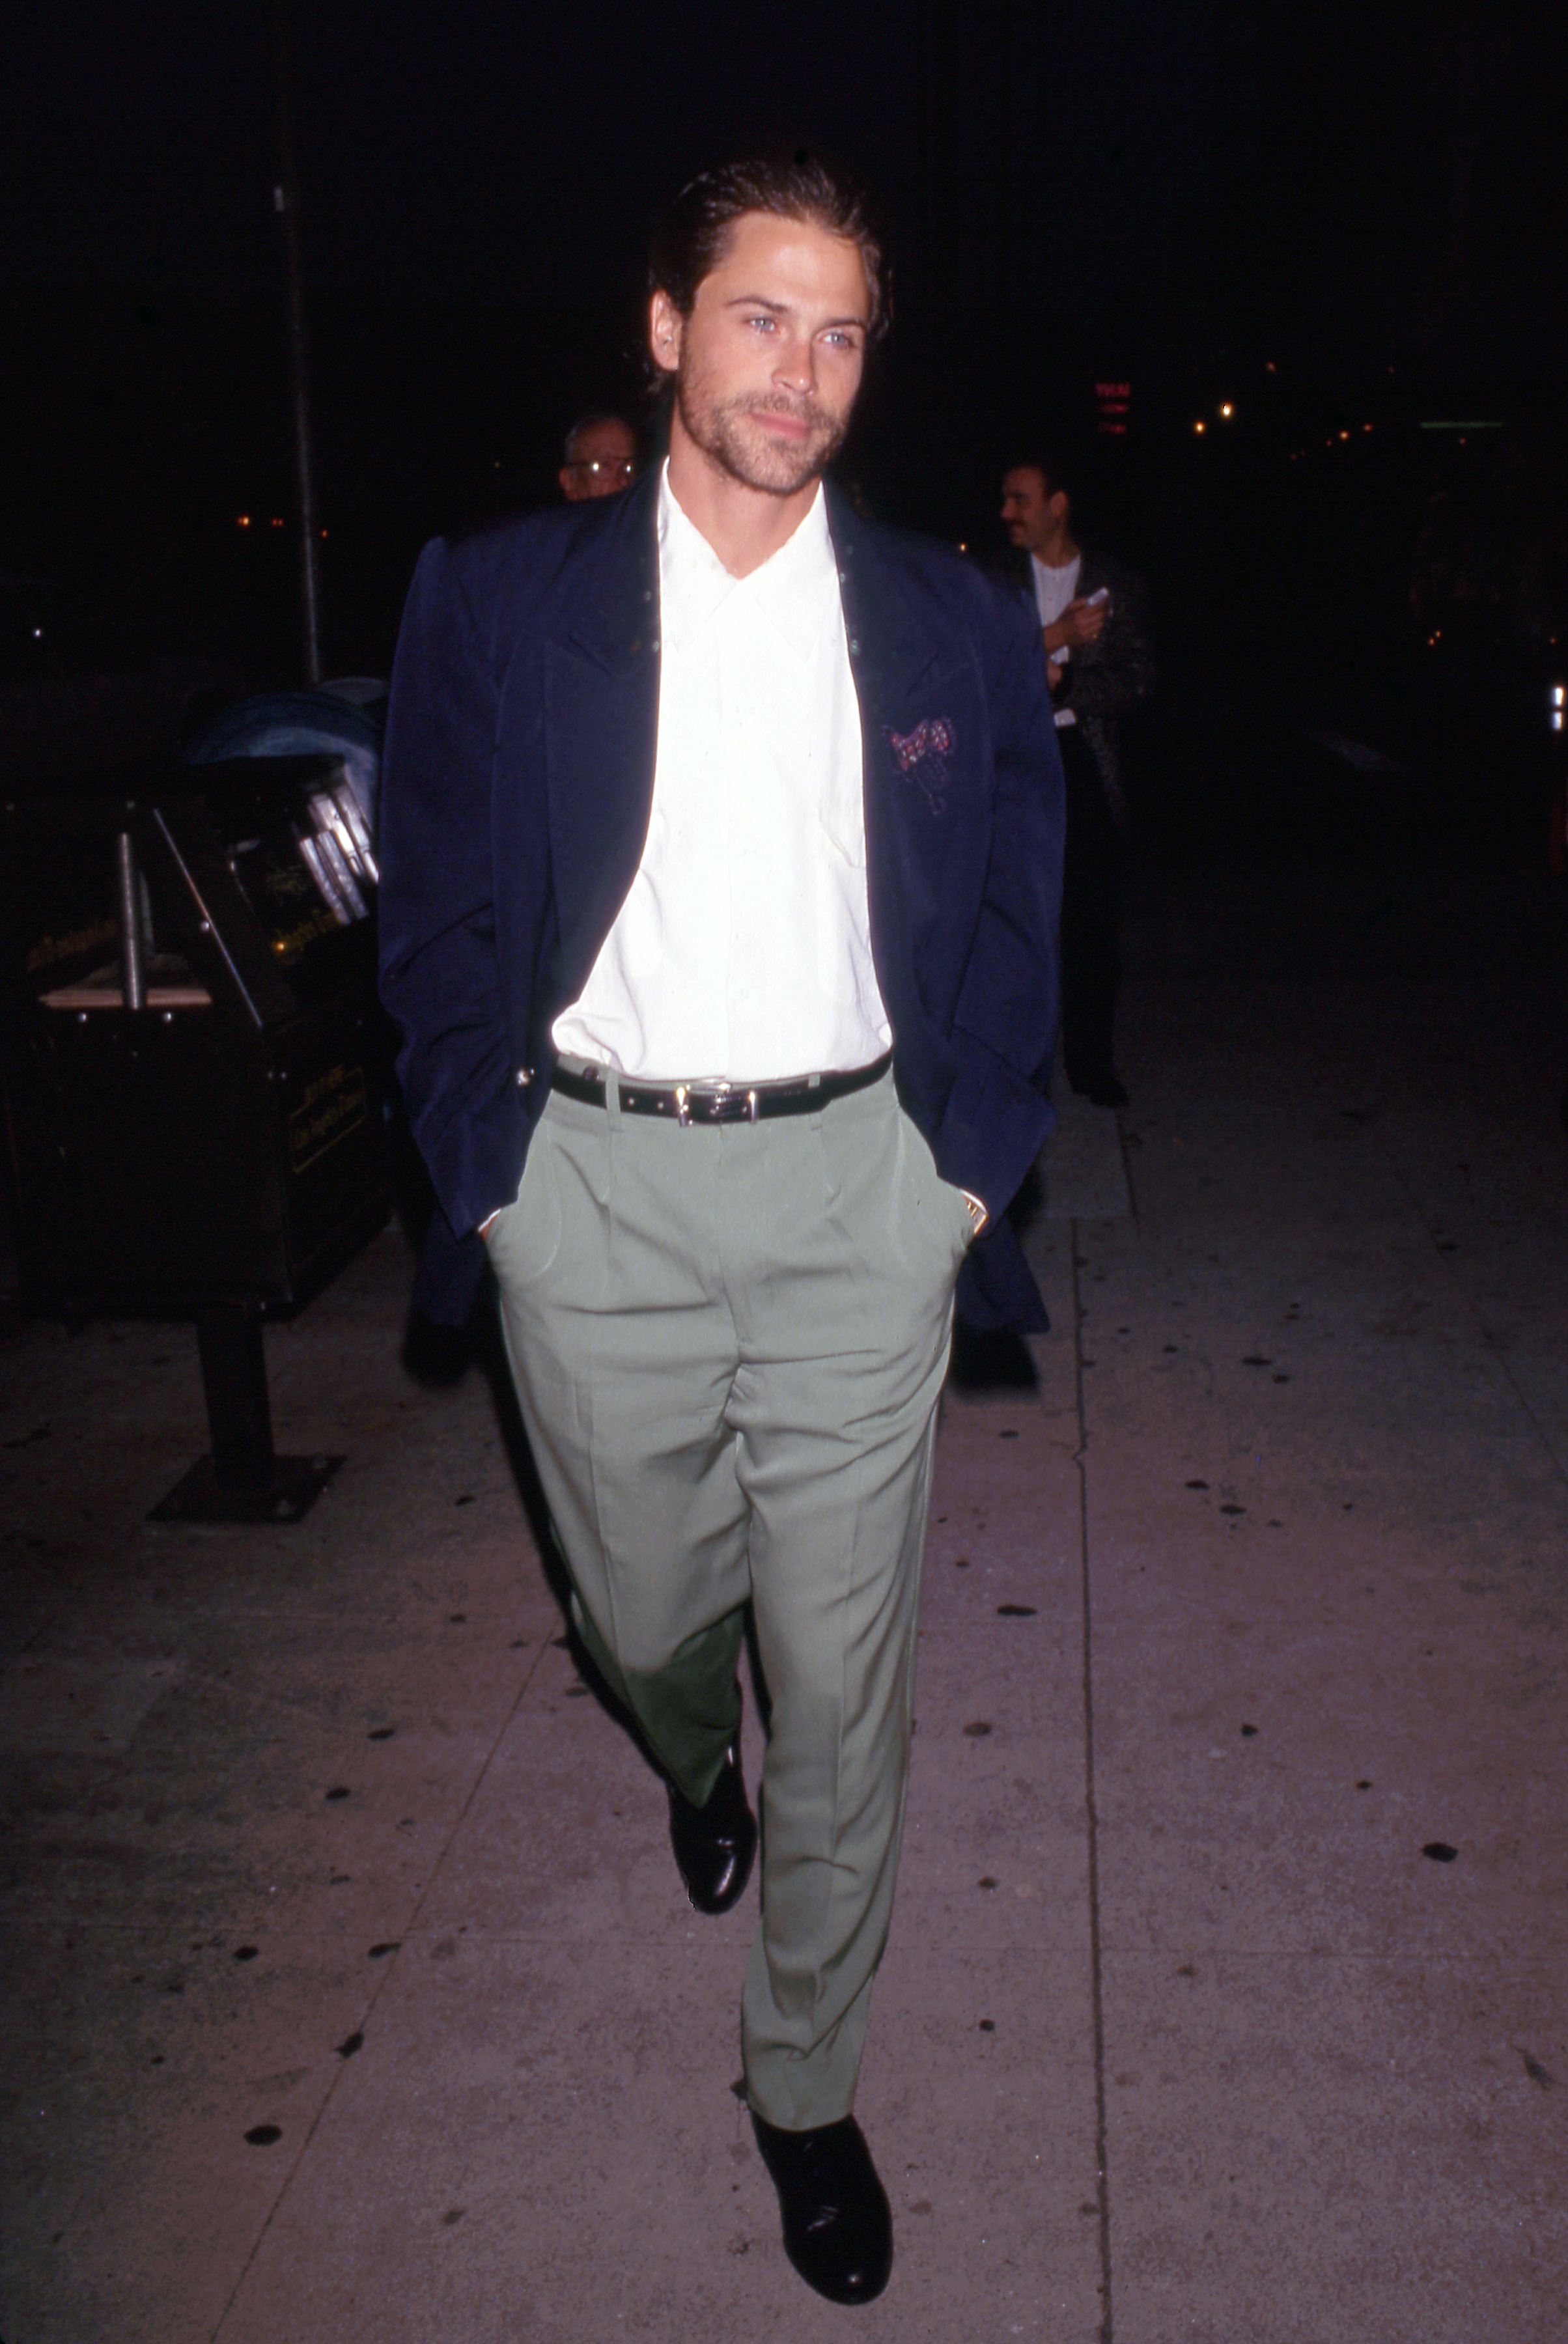 Rob Lowe, circa 1990 | Source: Getty Images